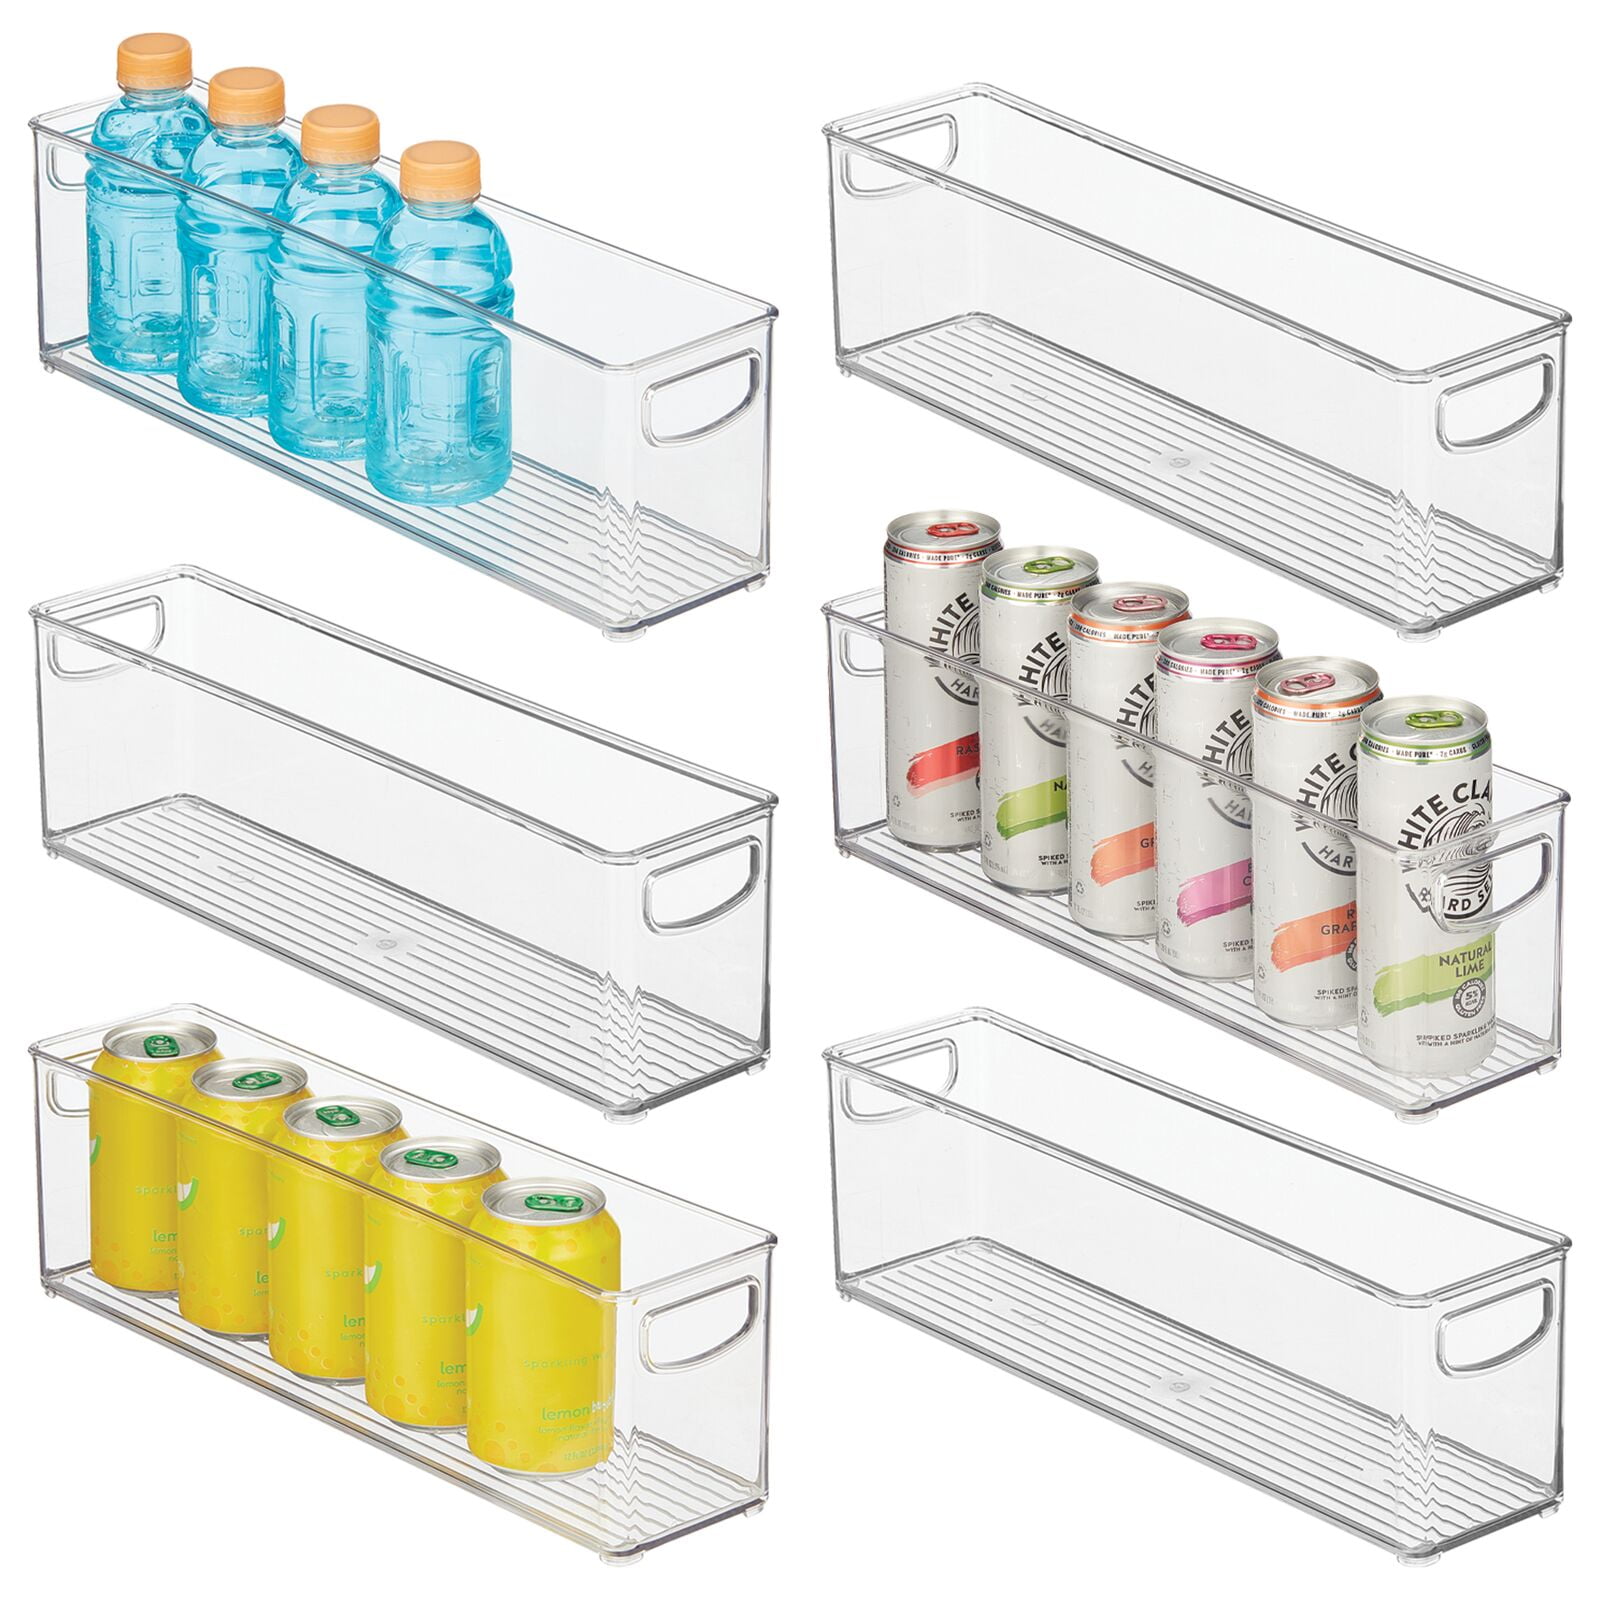 The Pantry Pack (6 Pack - Small Bottles)